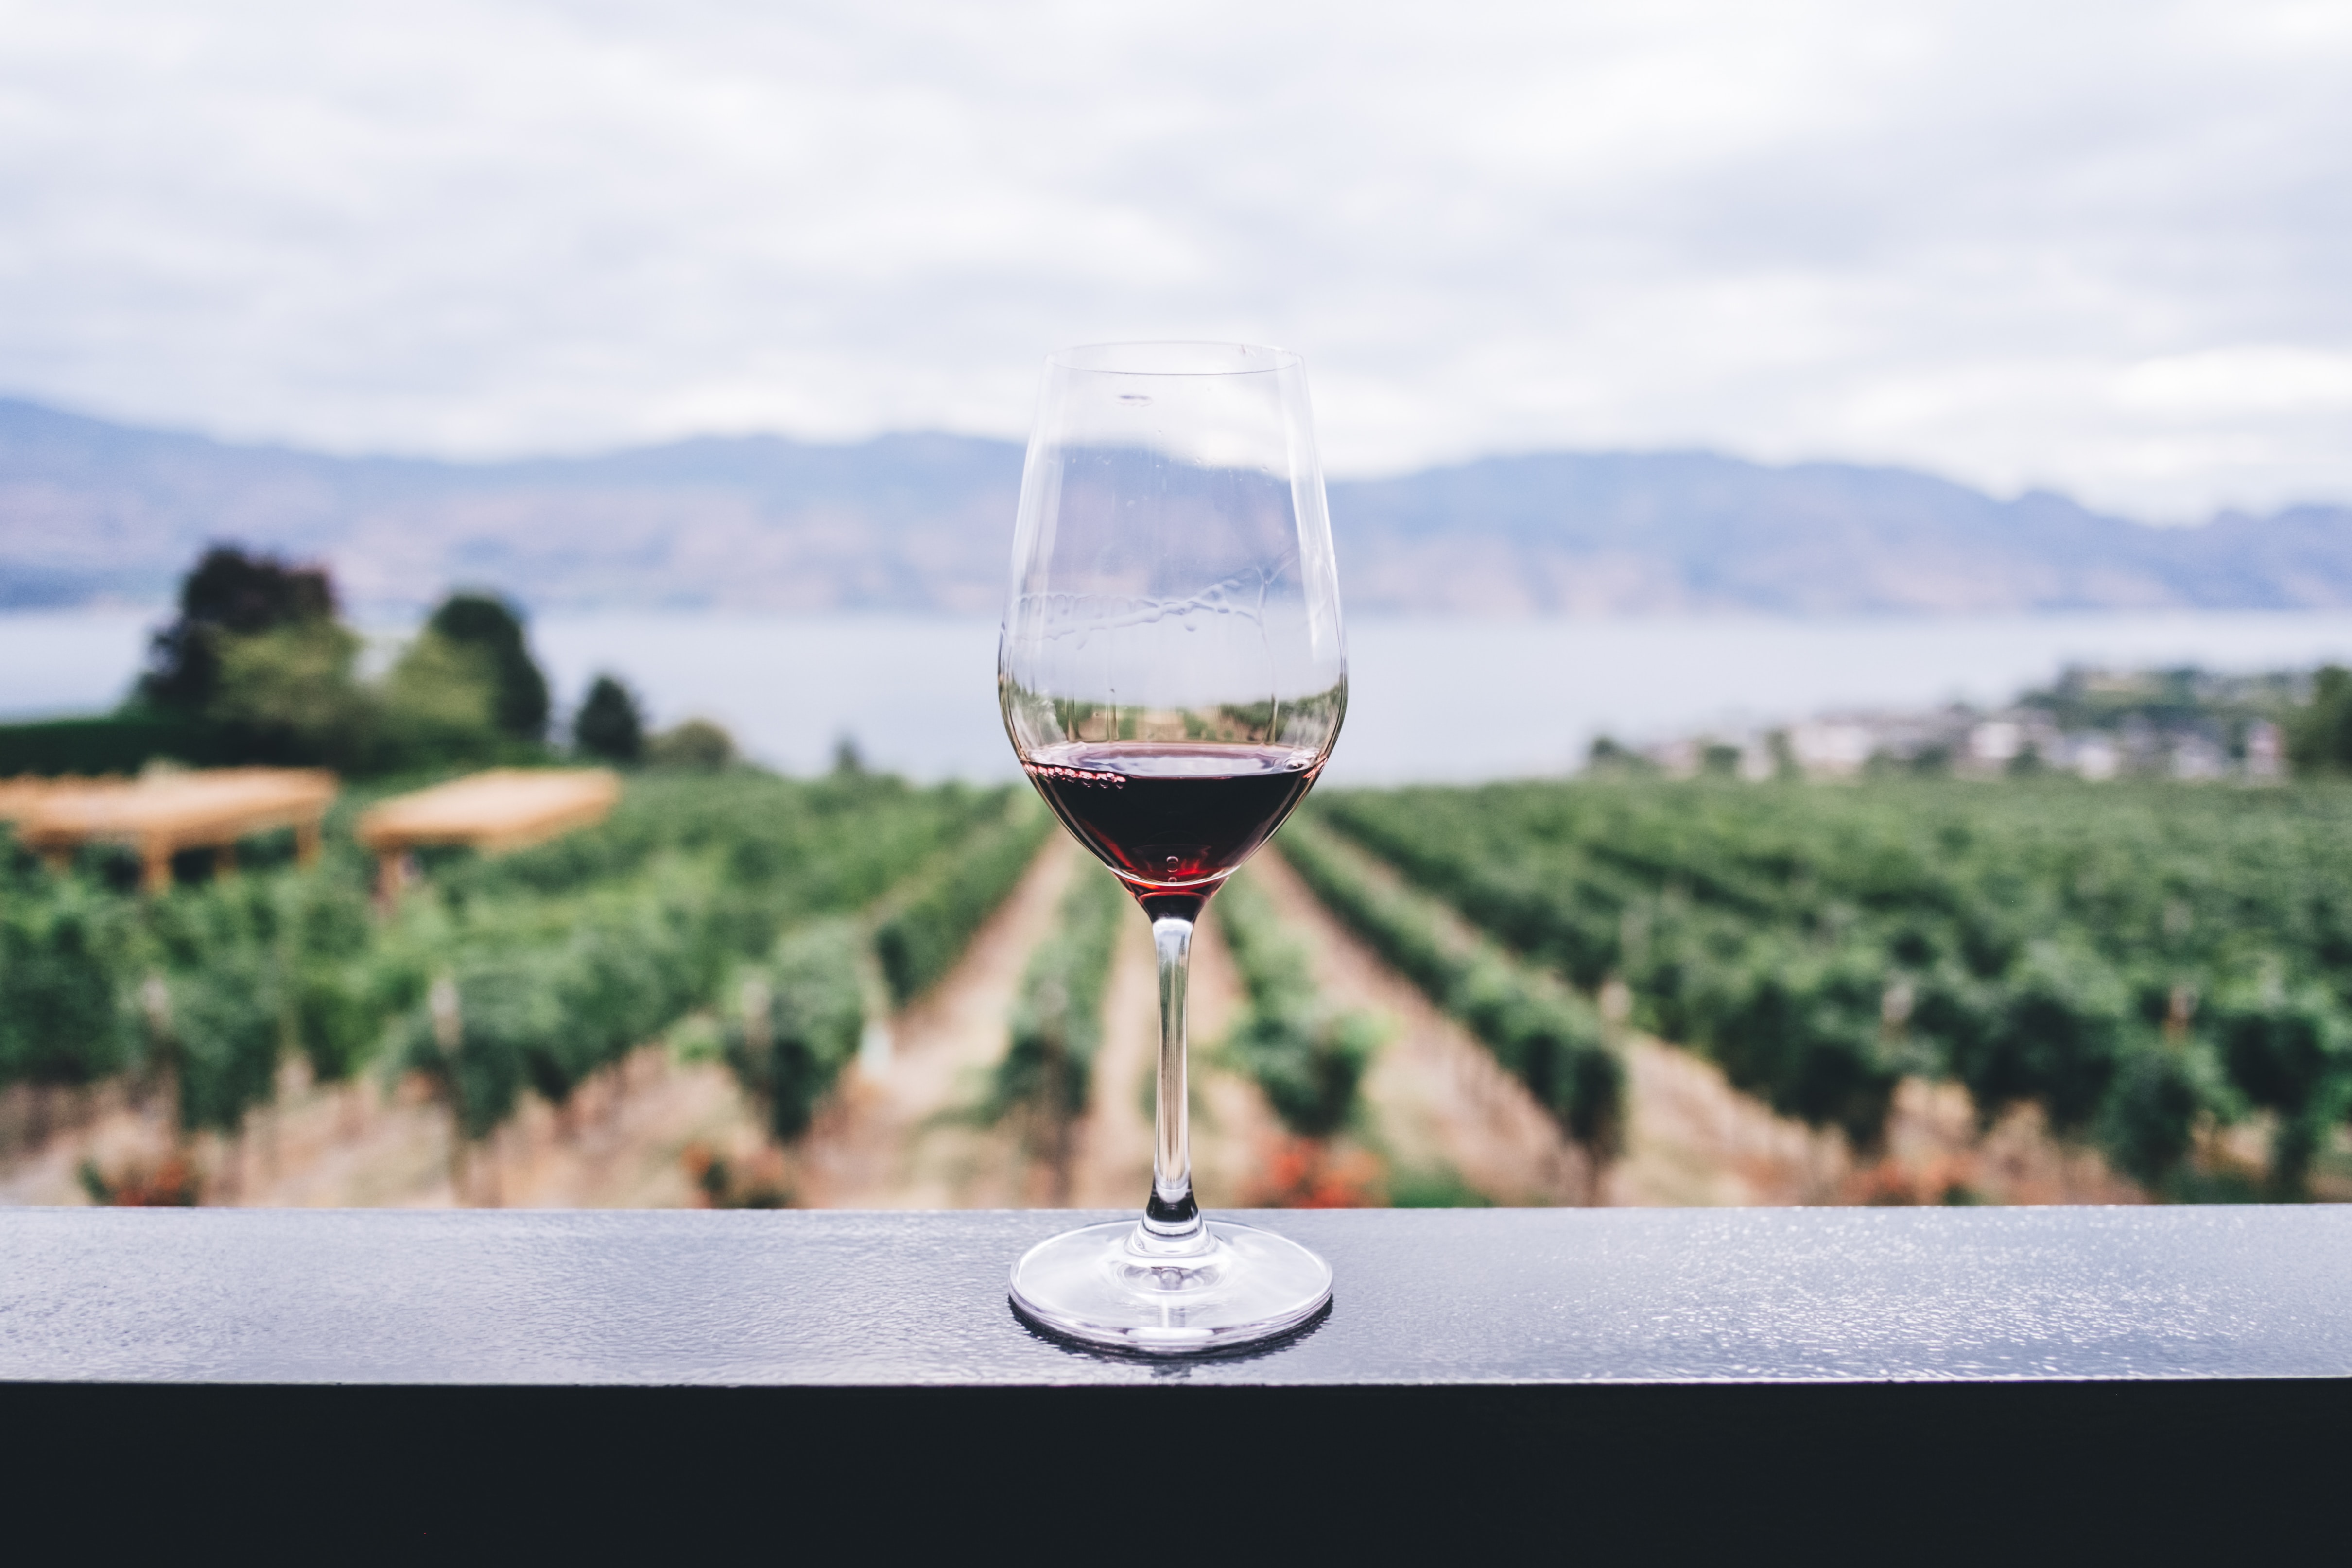 Wine glass in front of a vineyard